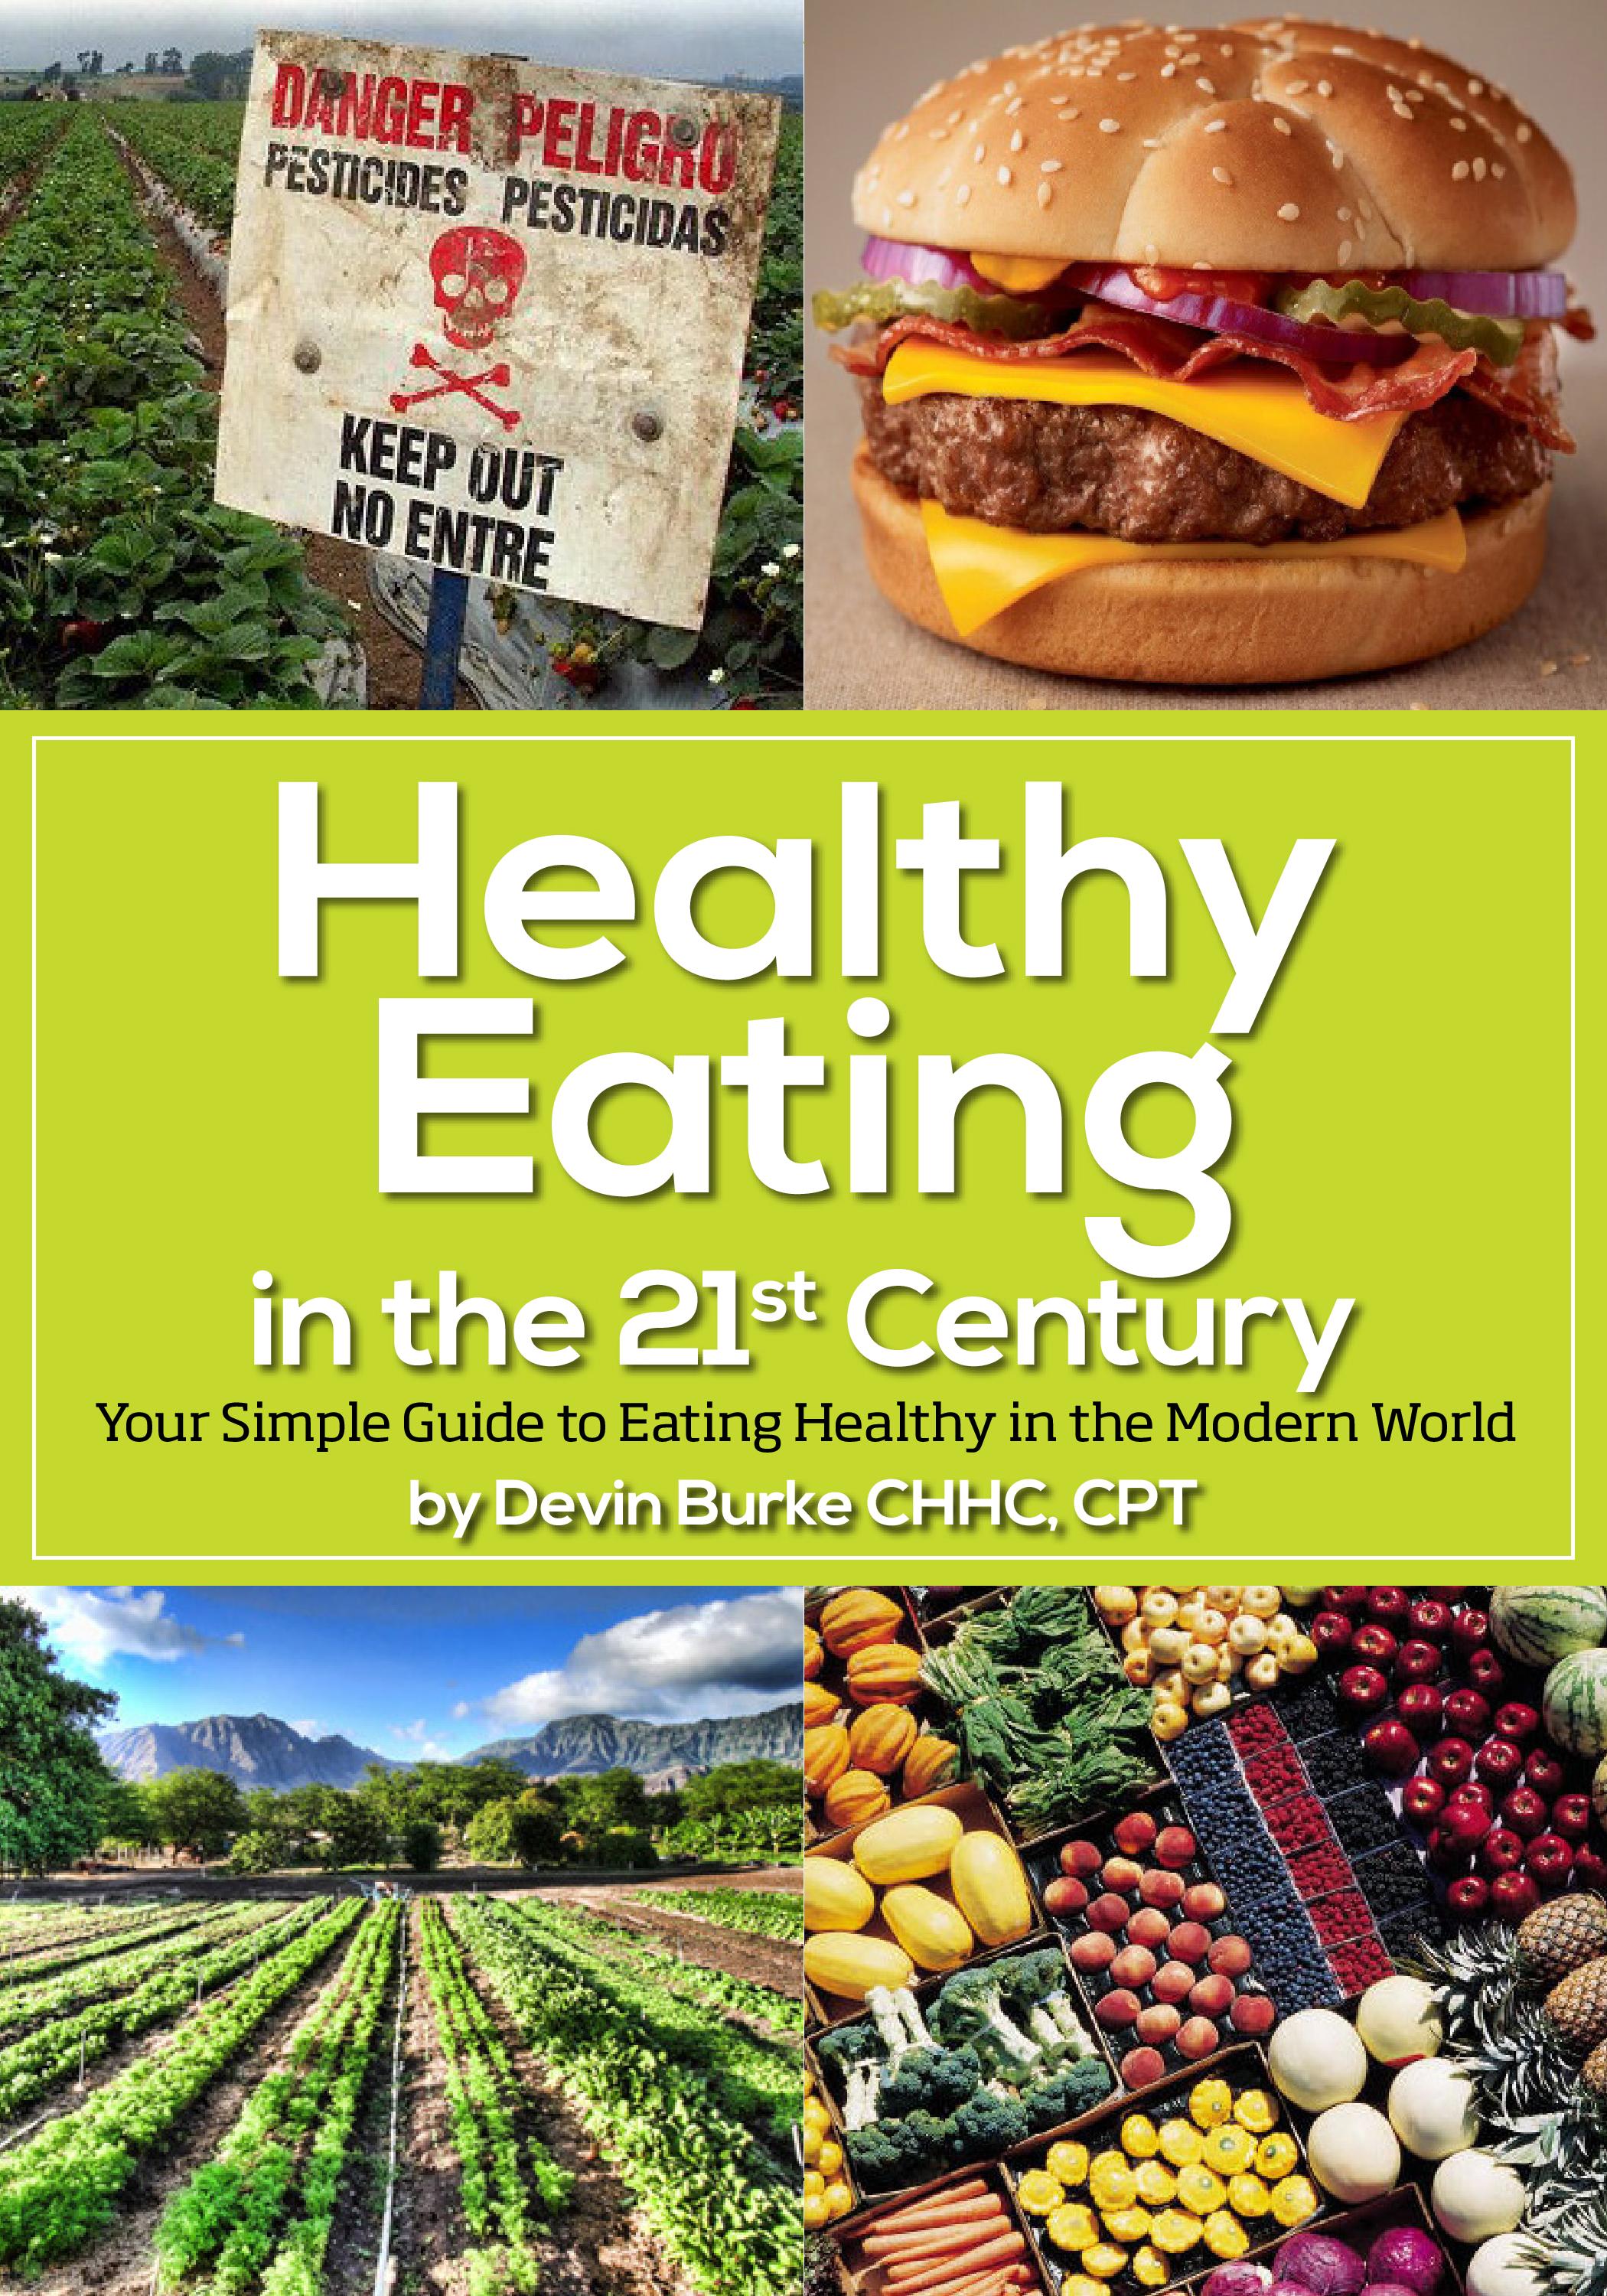 New Book Offers a Simple Guide to Eating Healthy in the Modern World (Press Release)